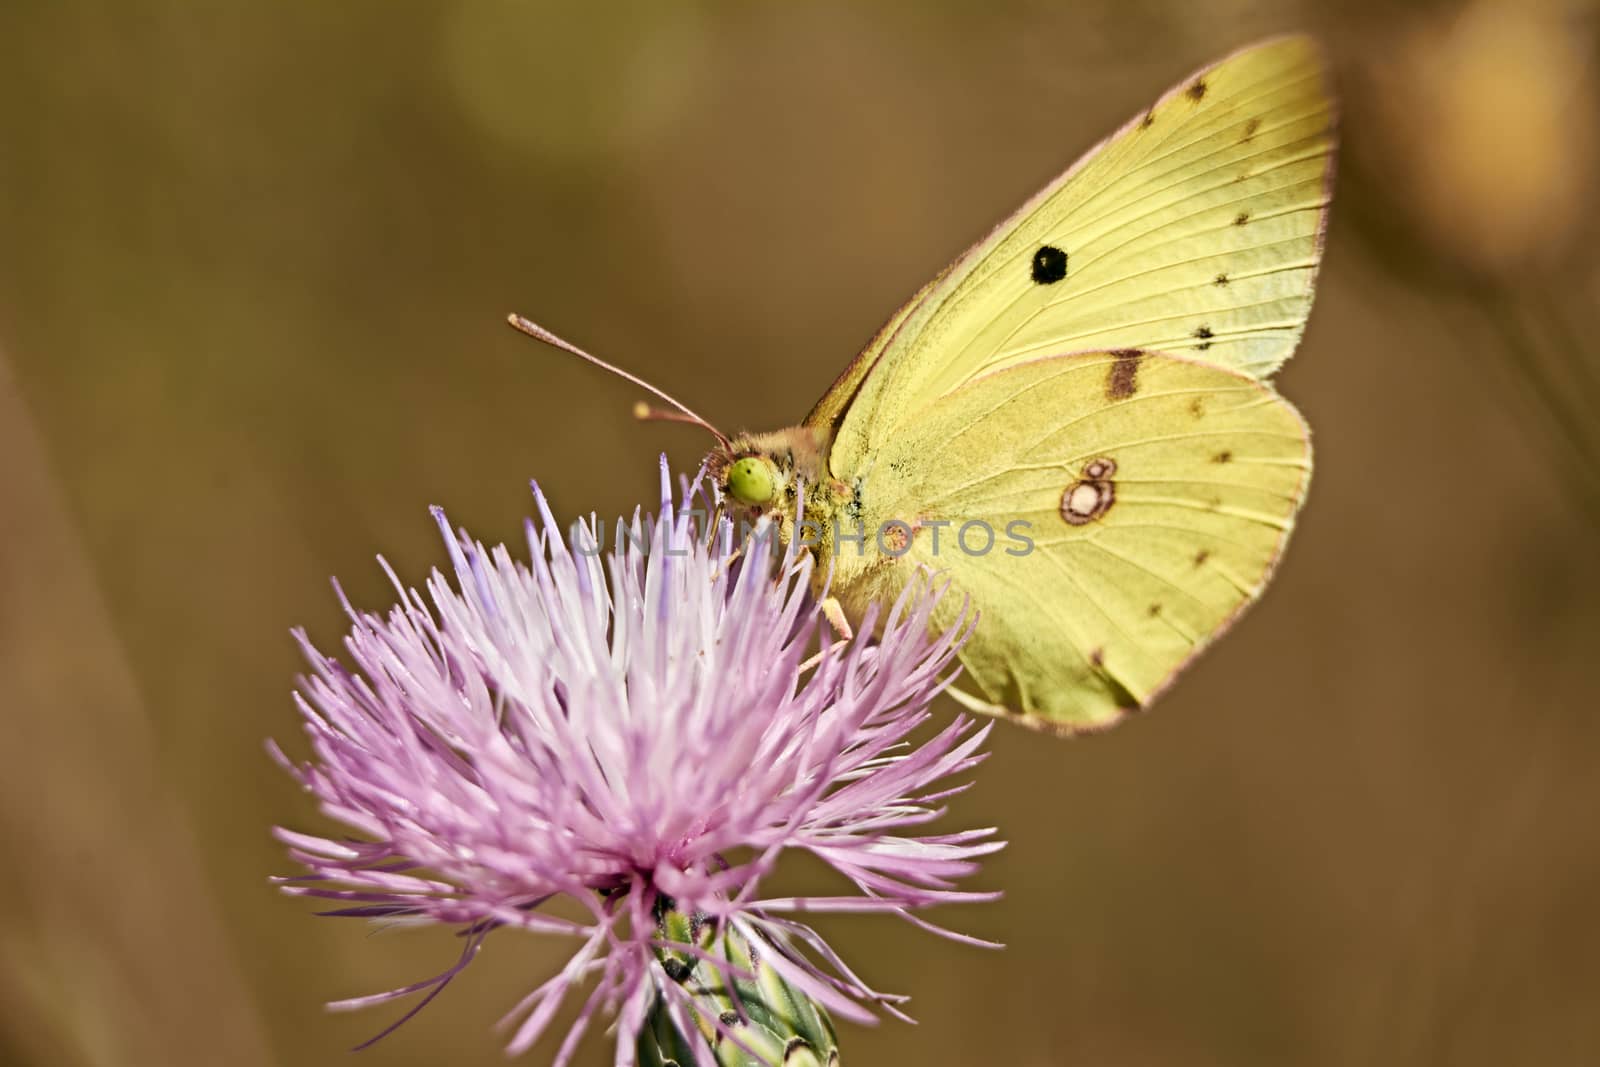 Greenish colored butterfly on a pink flower by raul_ruiz